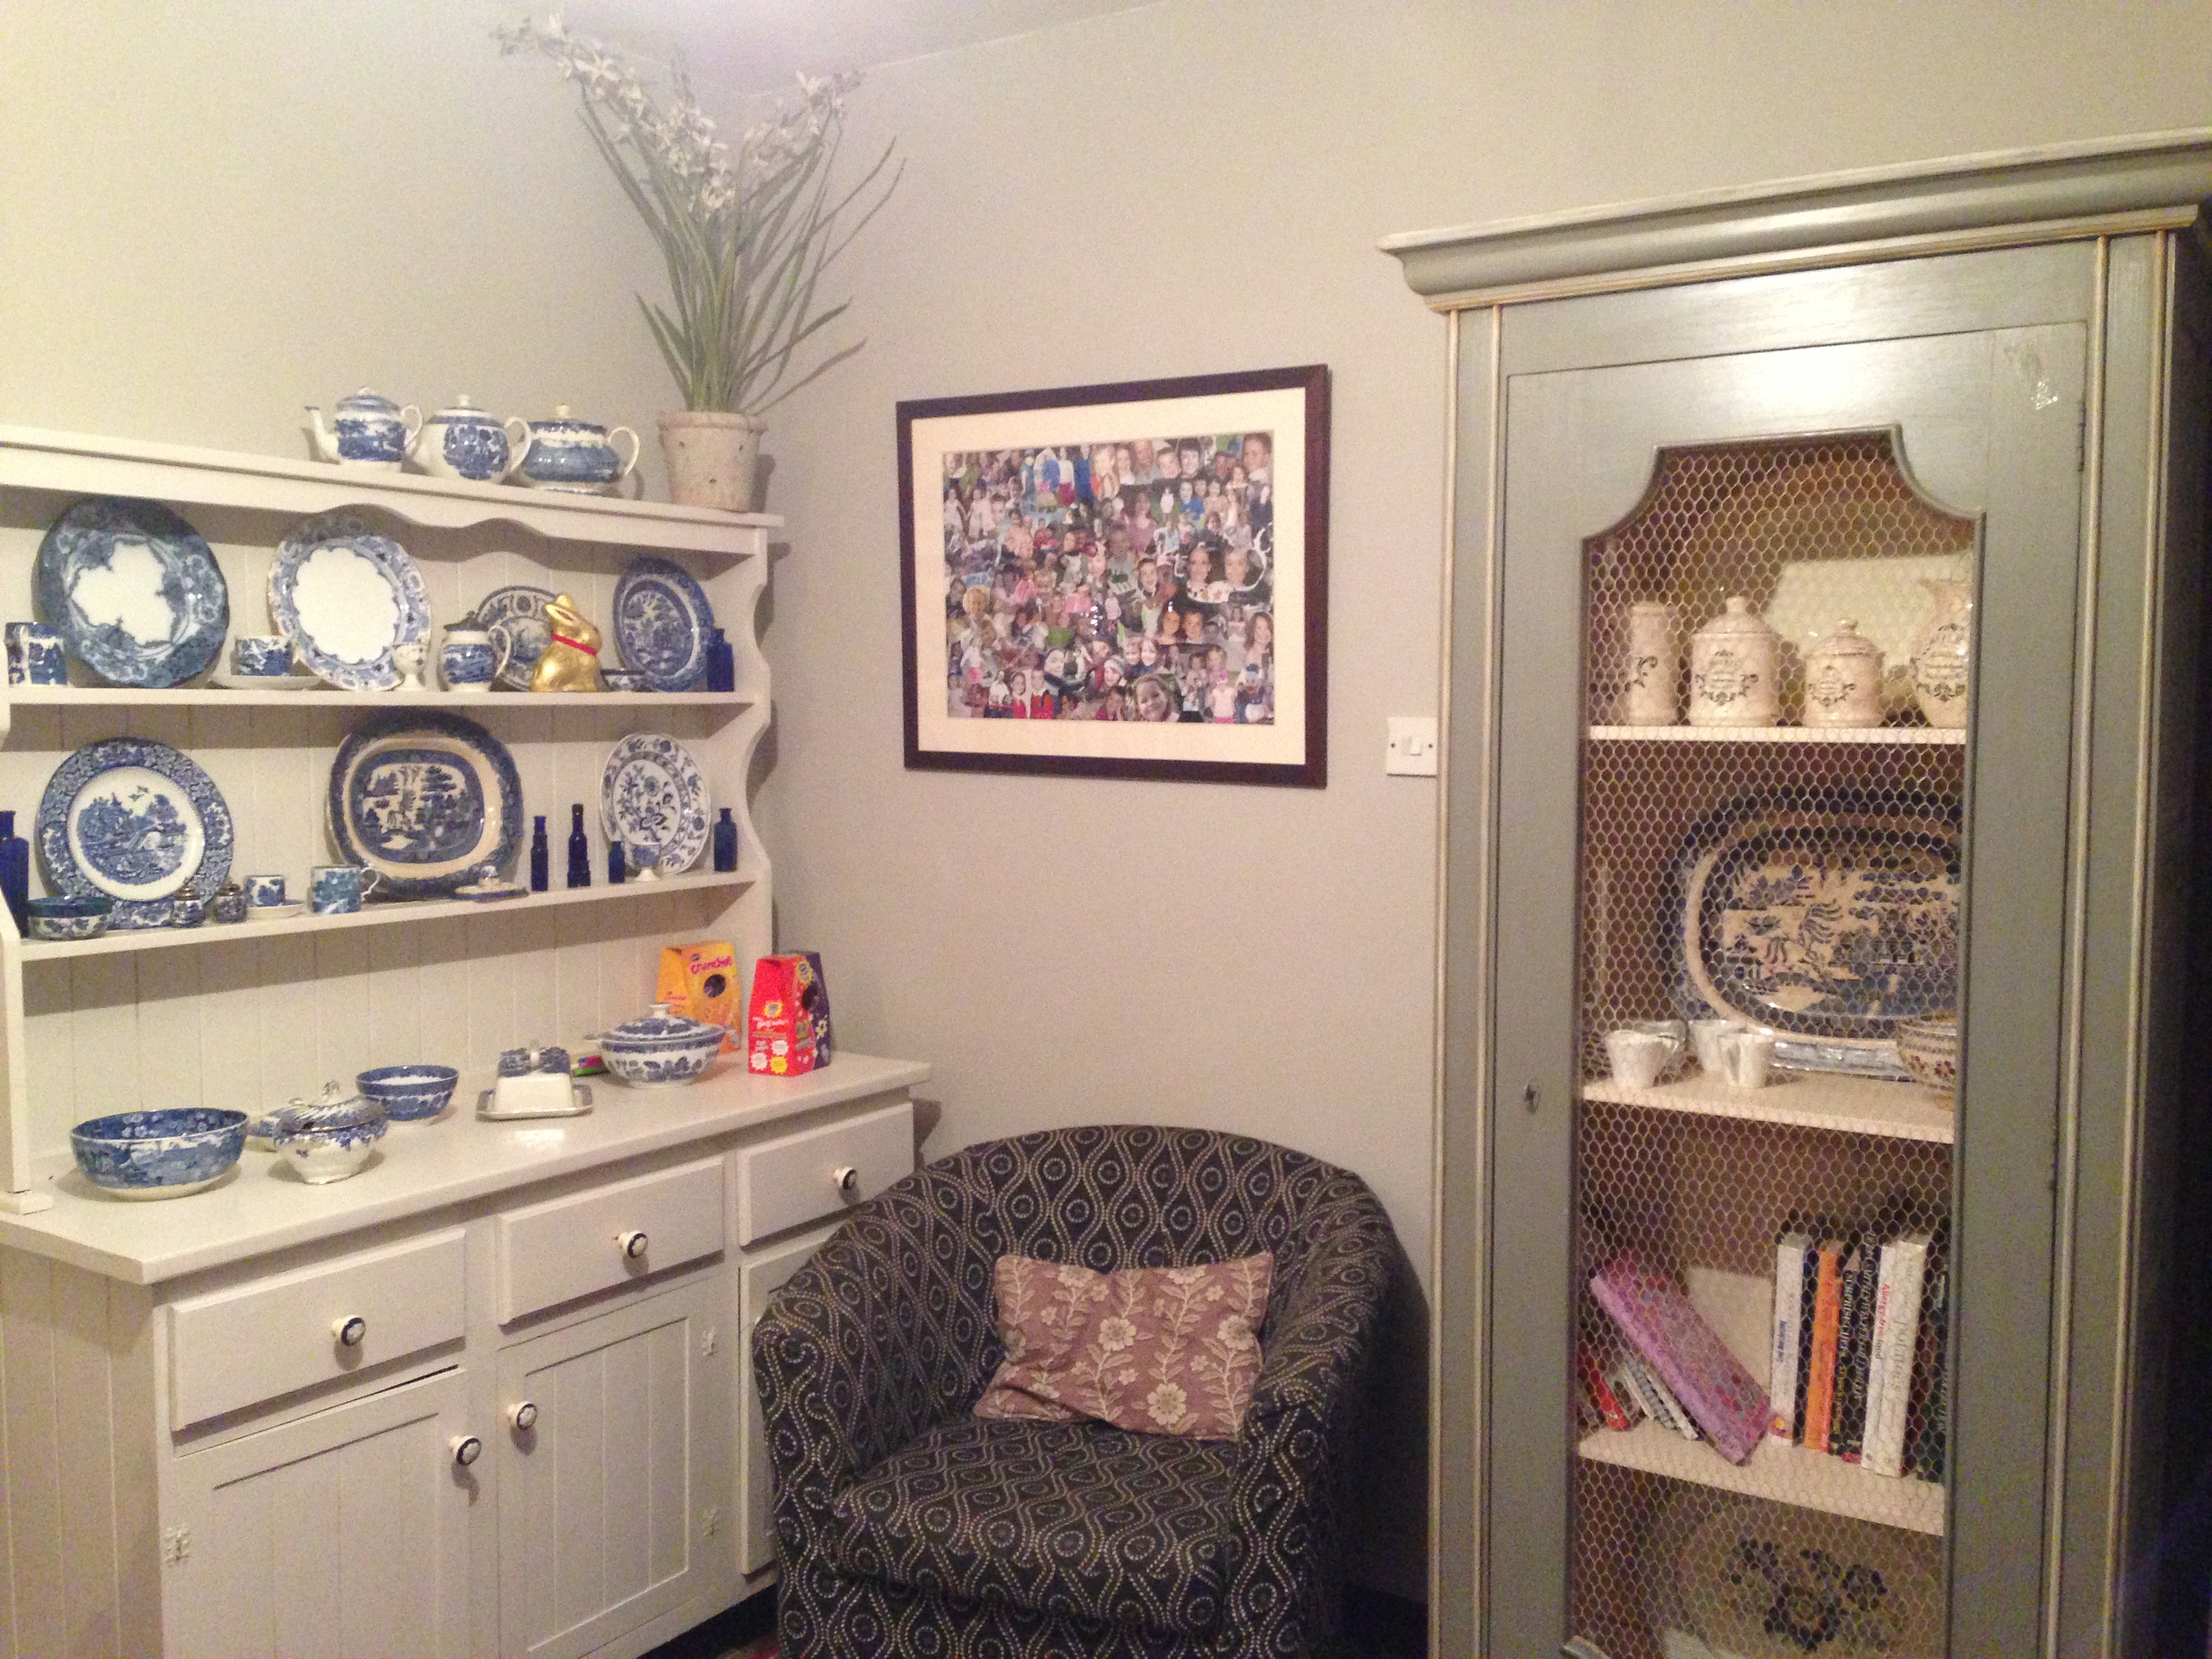 Blue and white china on dresser